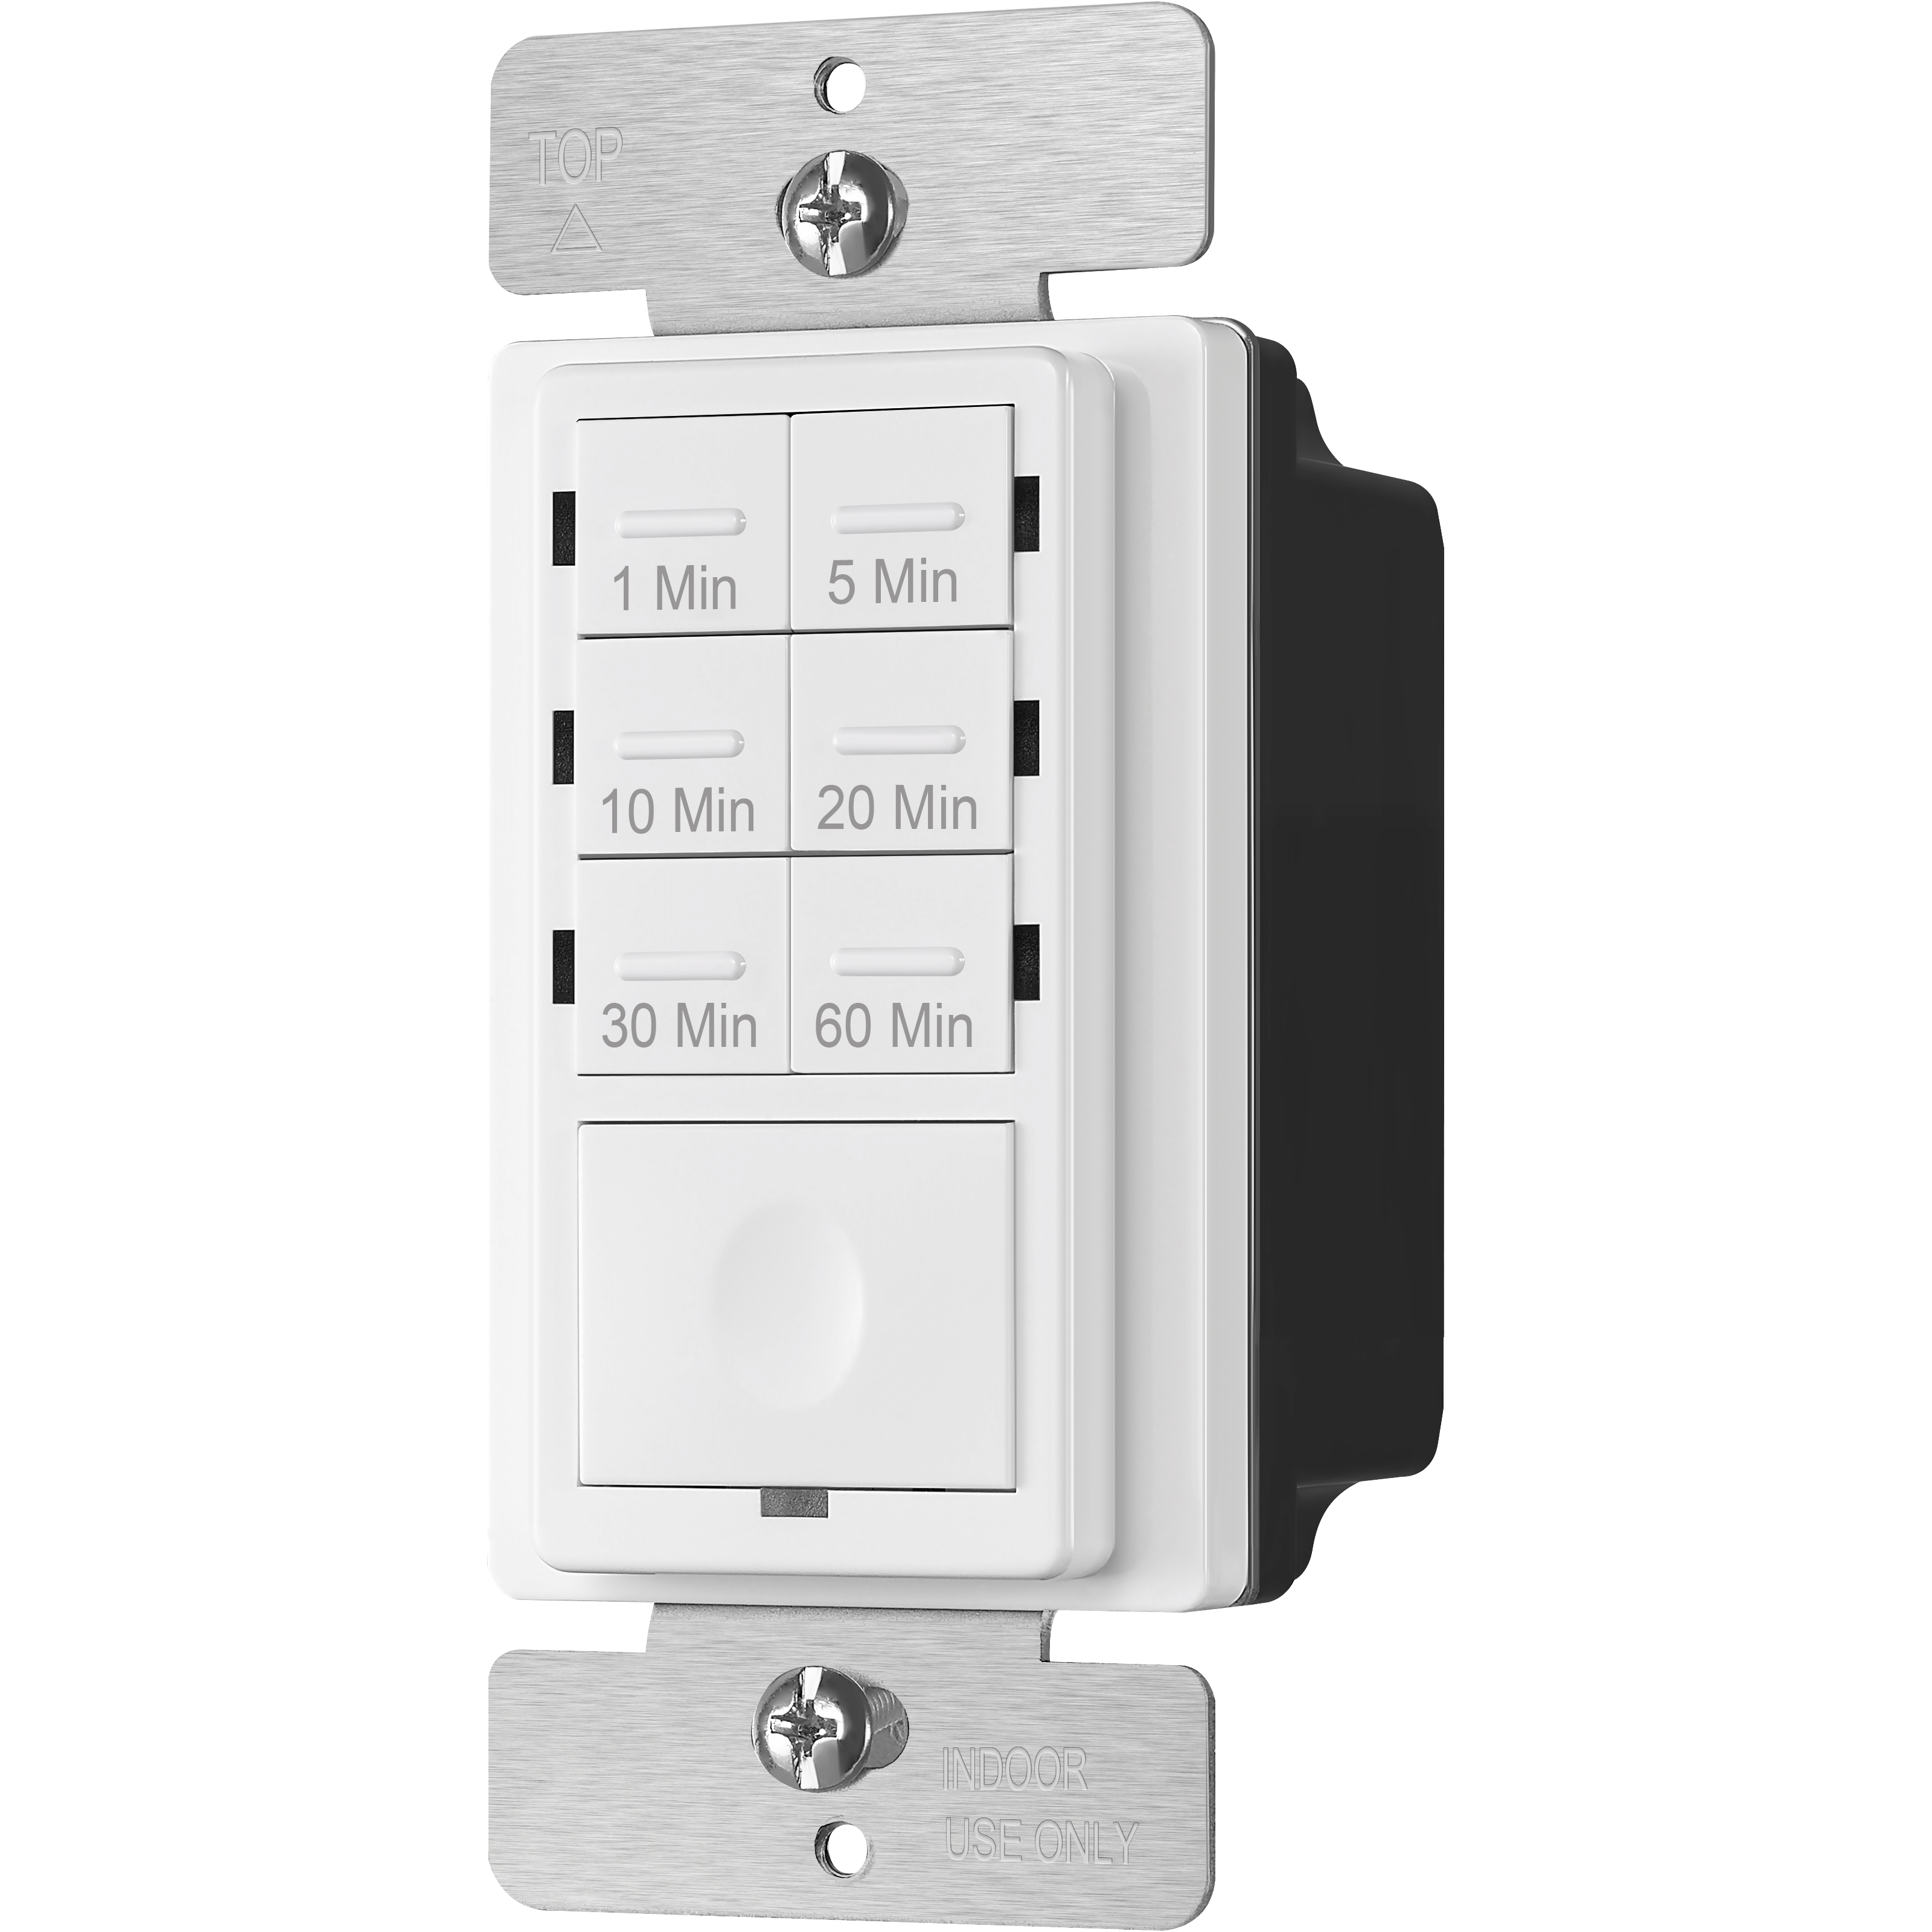 1-Hour Countdown Timer Switch for Bathroom Fans, Heaters, Lights